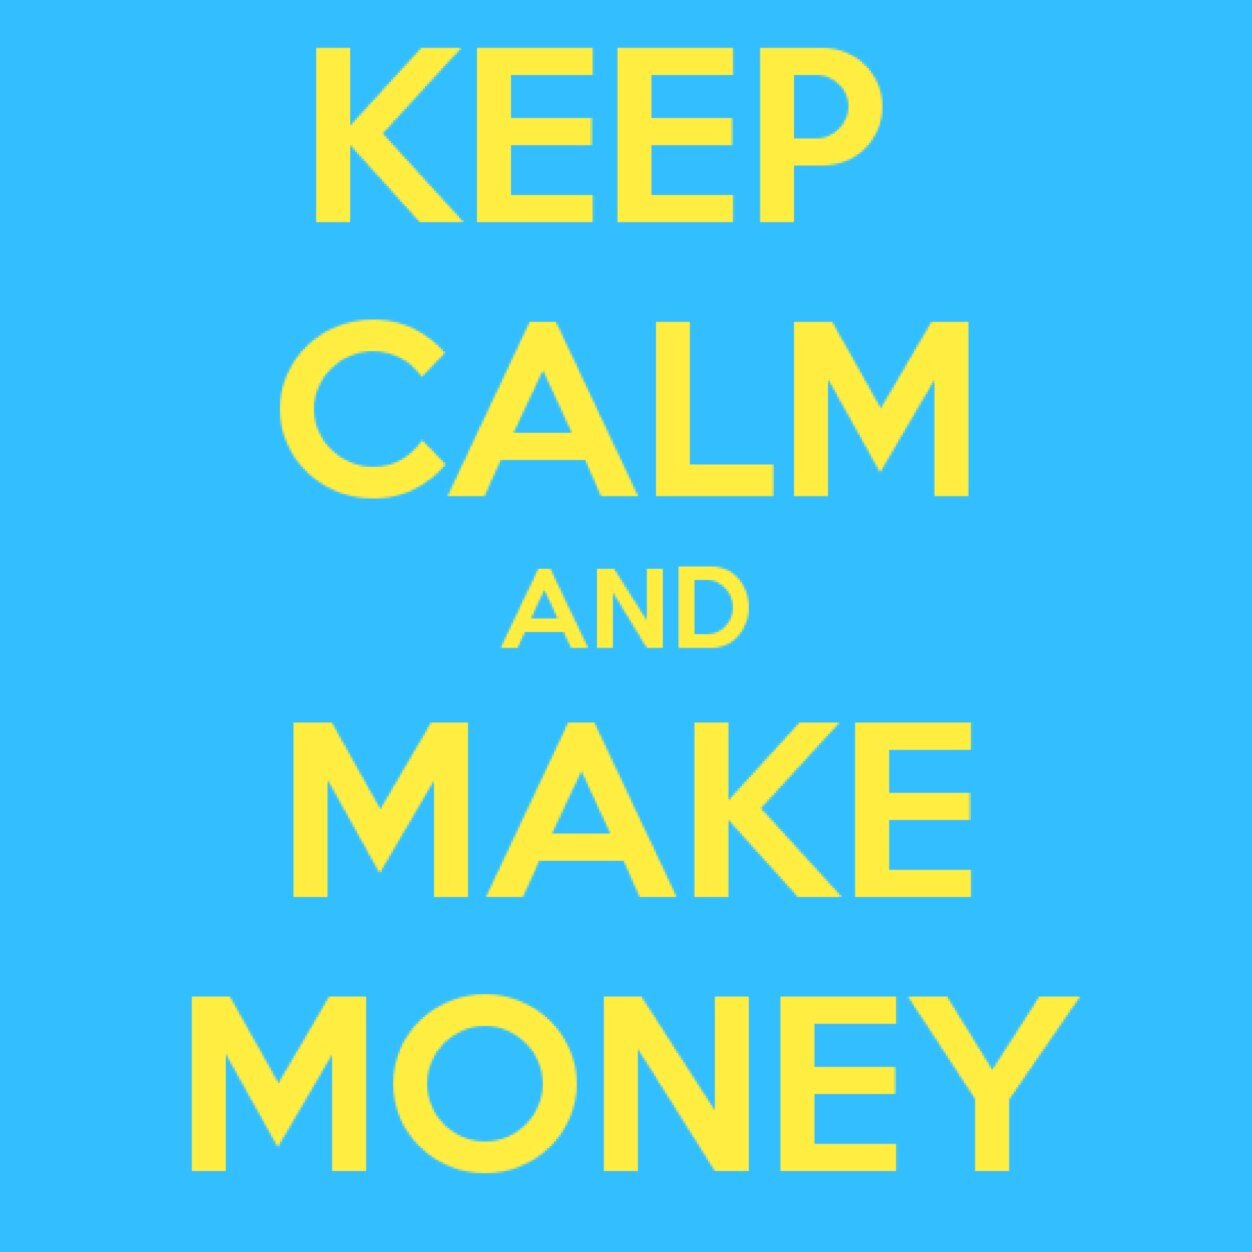 Check out my blog on ways to make even more money